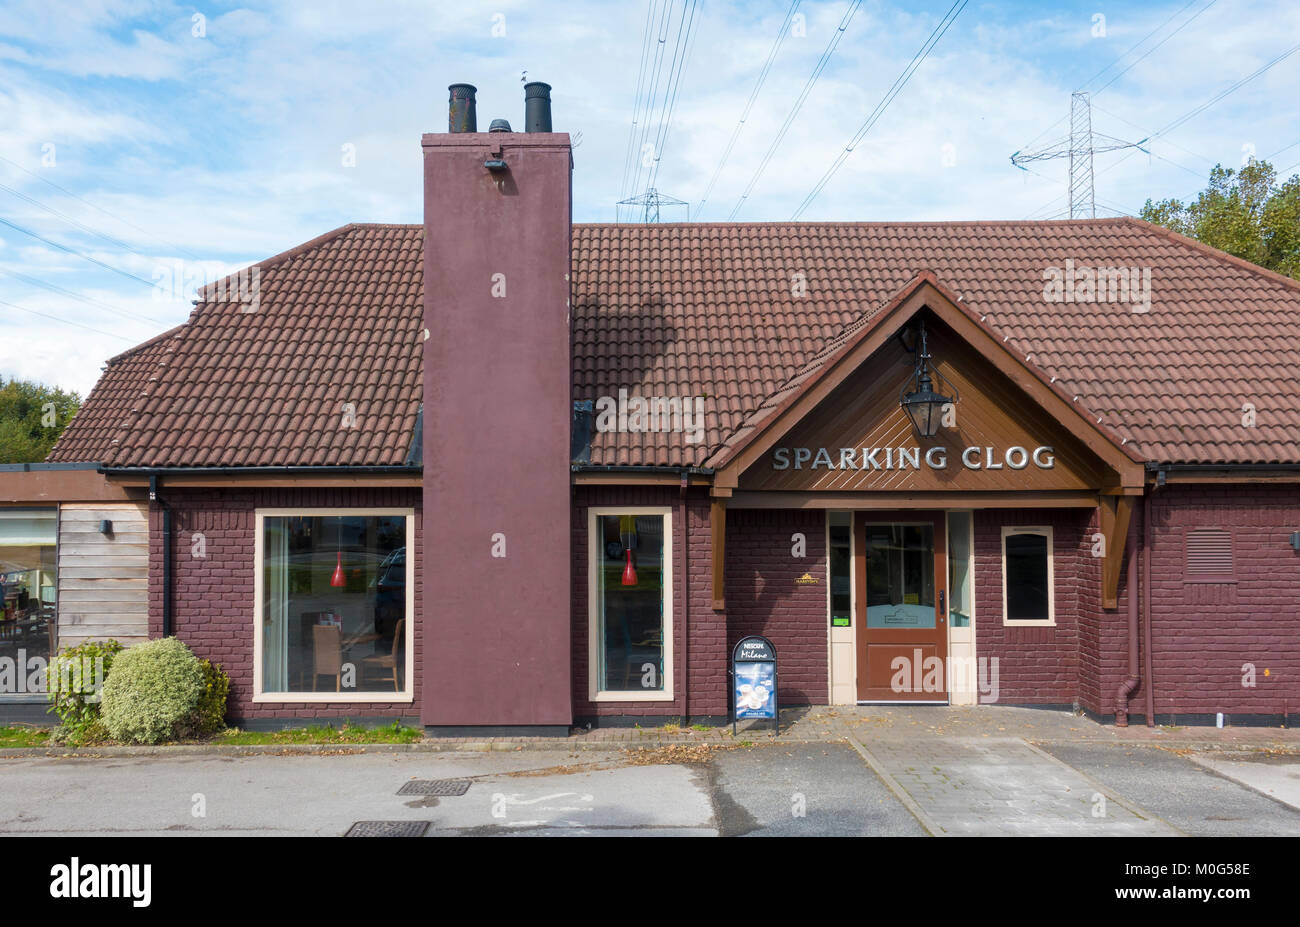 Sparking Clog Pub on Radcliffe Moor Road in Radcliffe, Manchester. Used as a location in Peters Kays series Max & Paddys Road to Nowhere Stock Photo